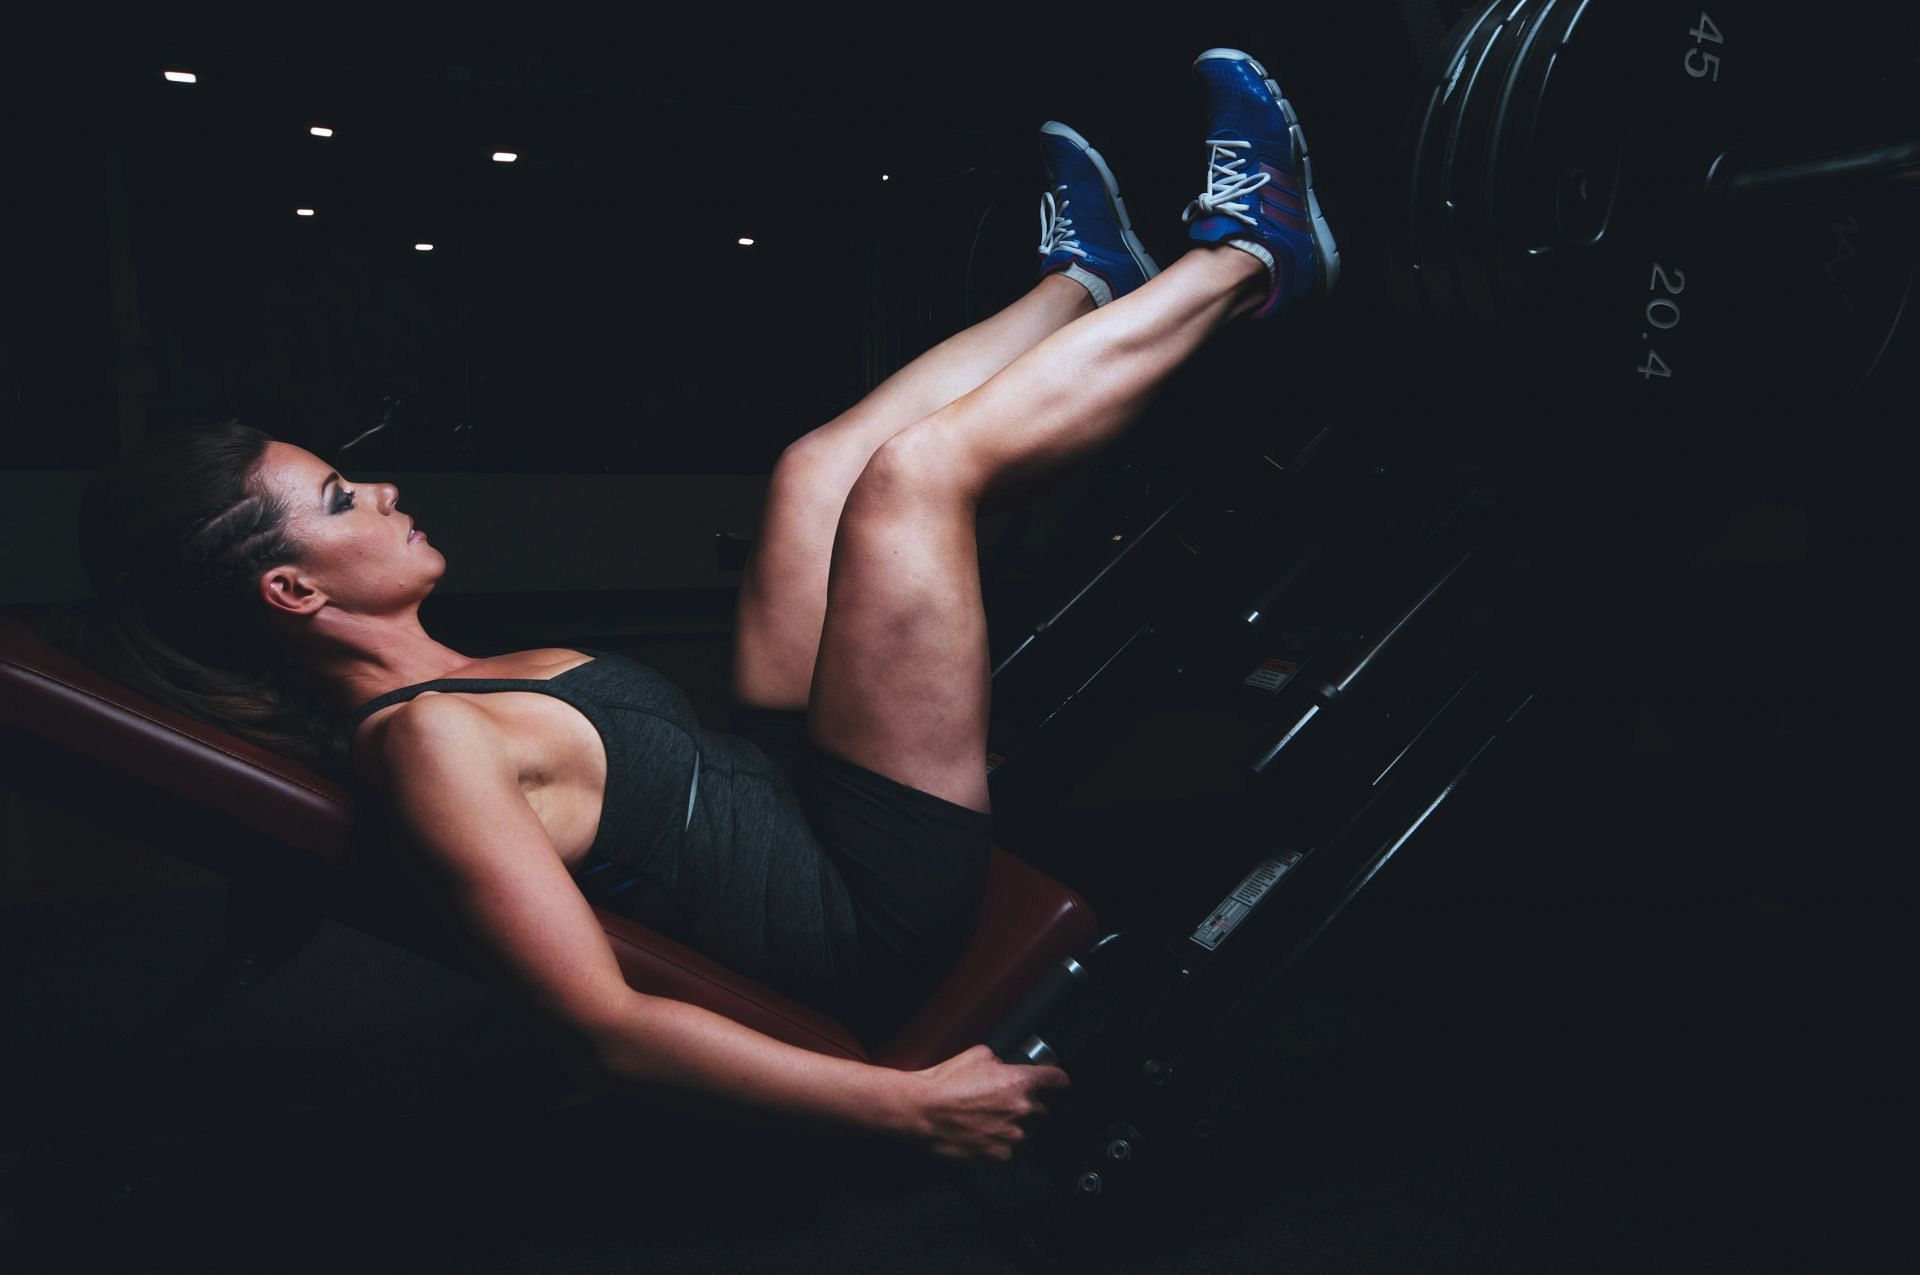 Thunder thighs can be fixed with simple workouts (Image via Unsplash/ Scott Webb)